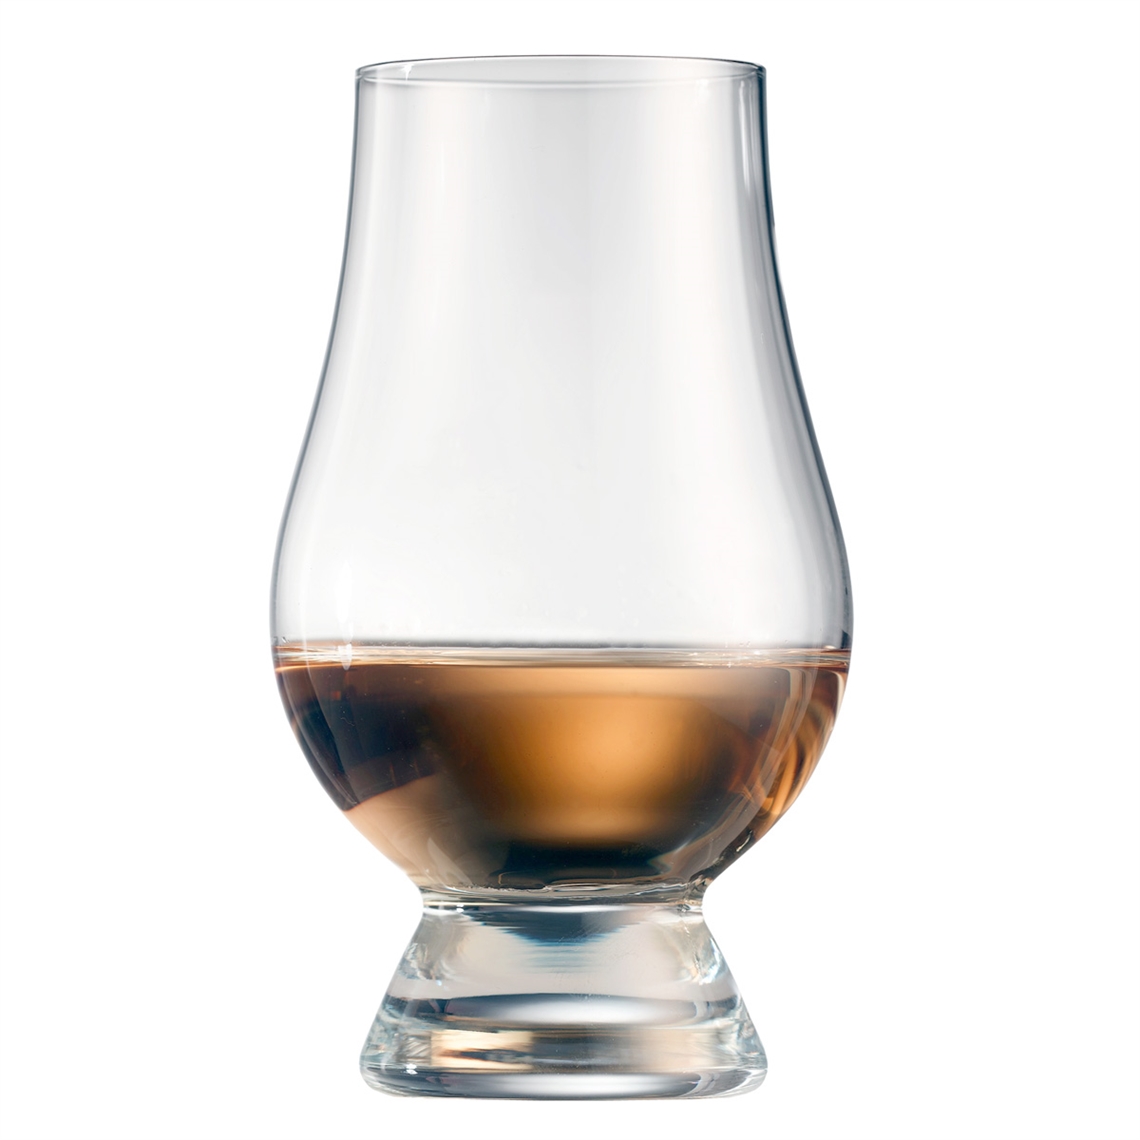 View more sydonios from our Whisky Glasses range